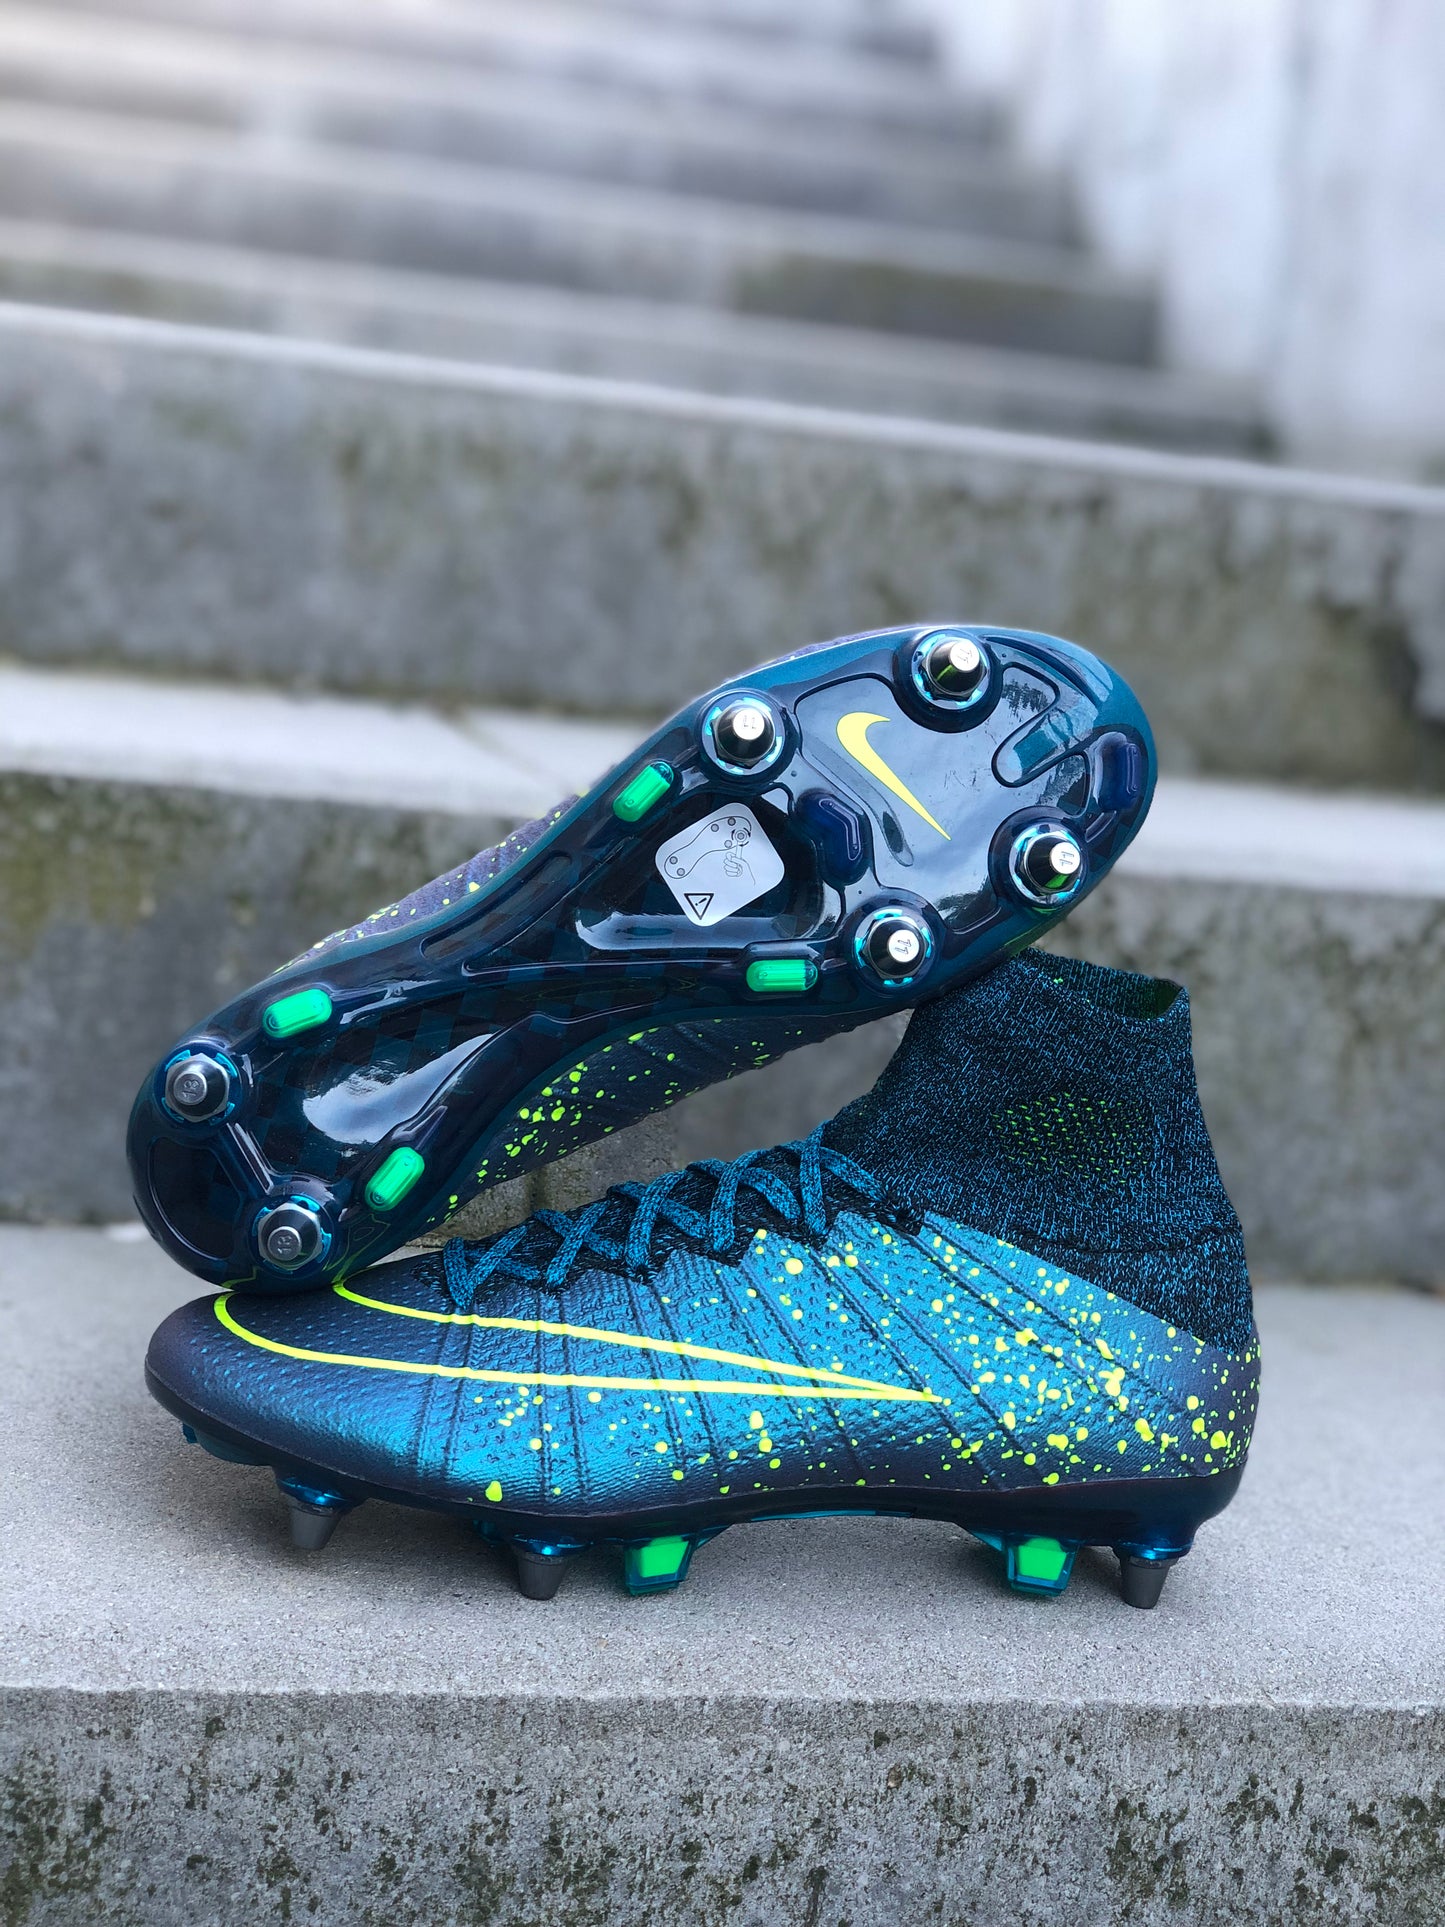 NIKE MERCURIAL SUPERFLY IV SG-PRO